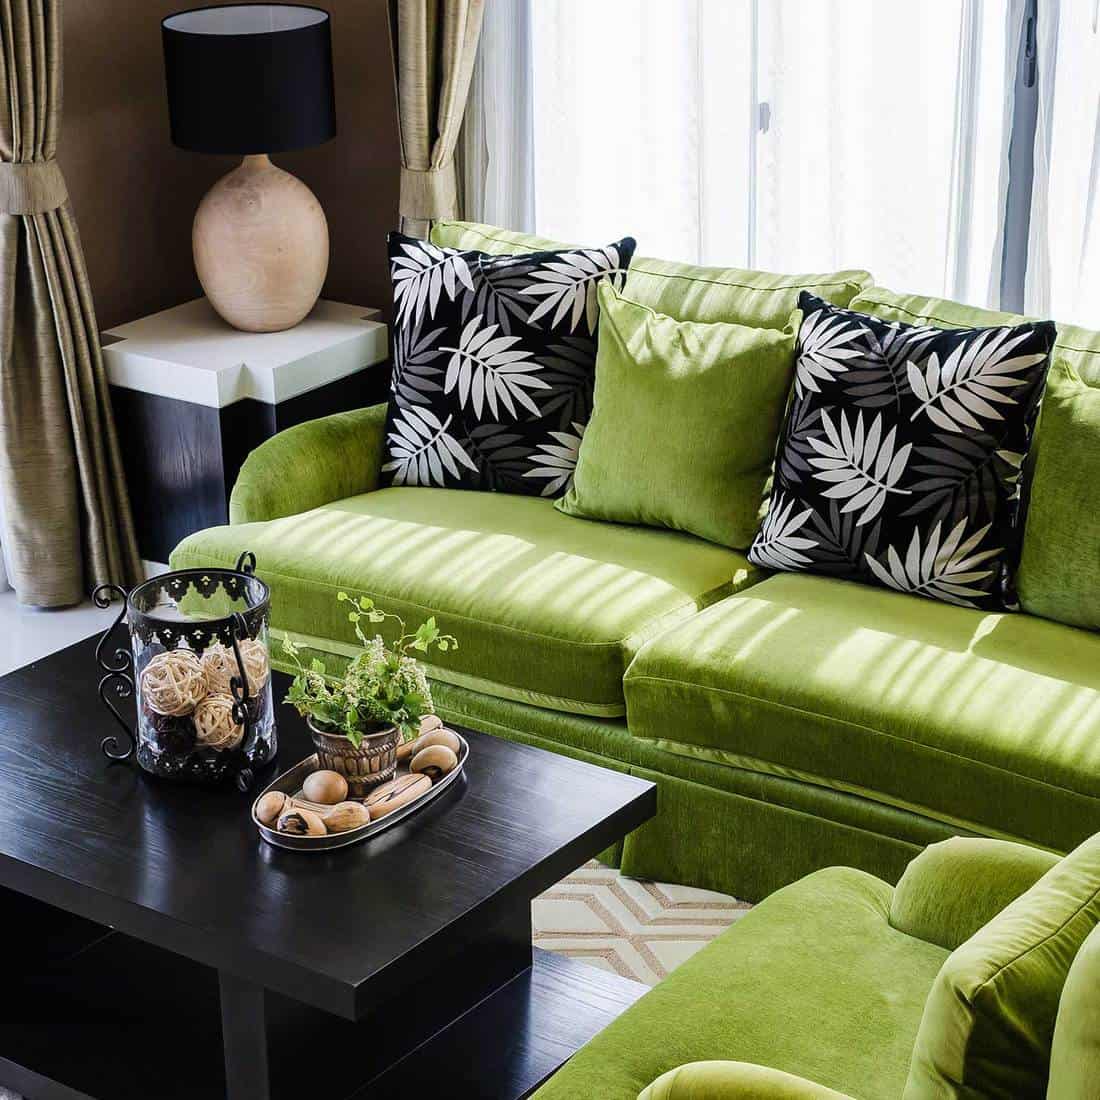 Modern living room design with green sofa set, throw pillows and black coffee table